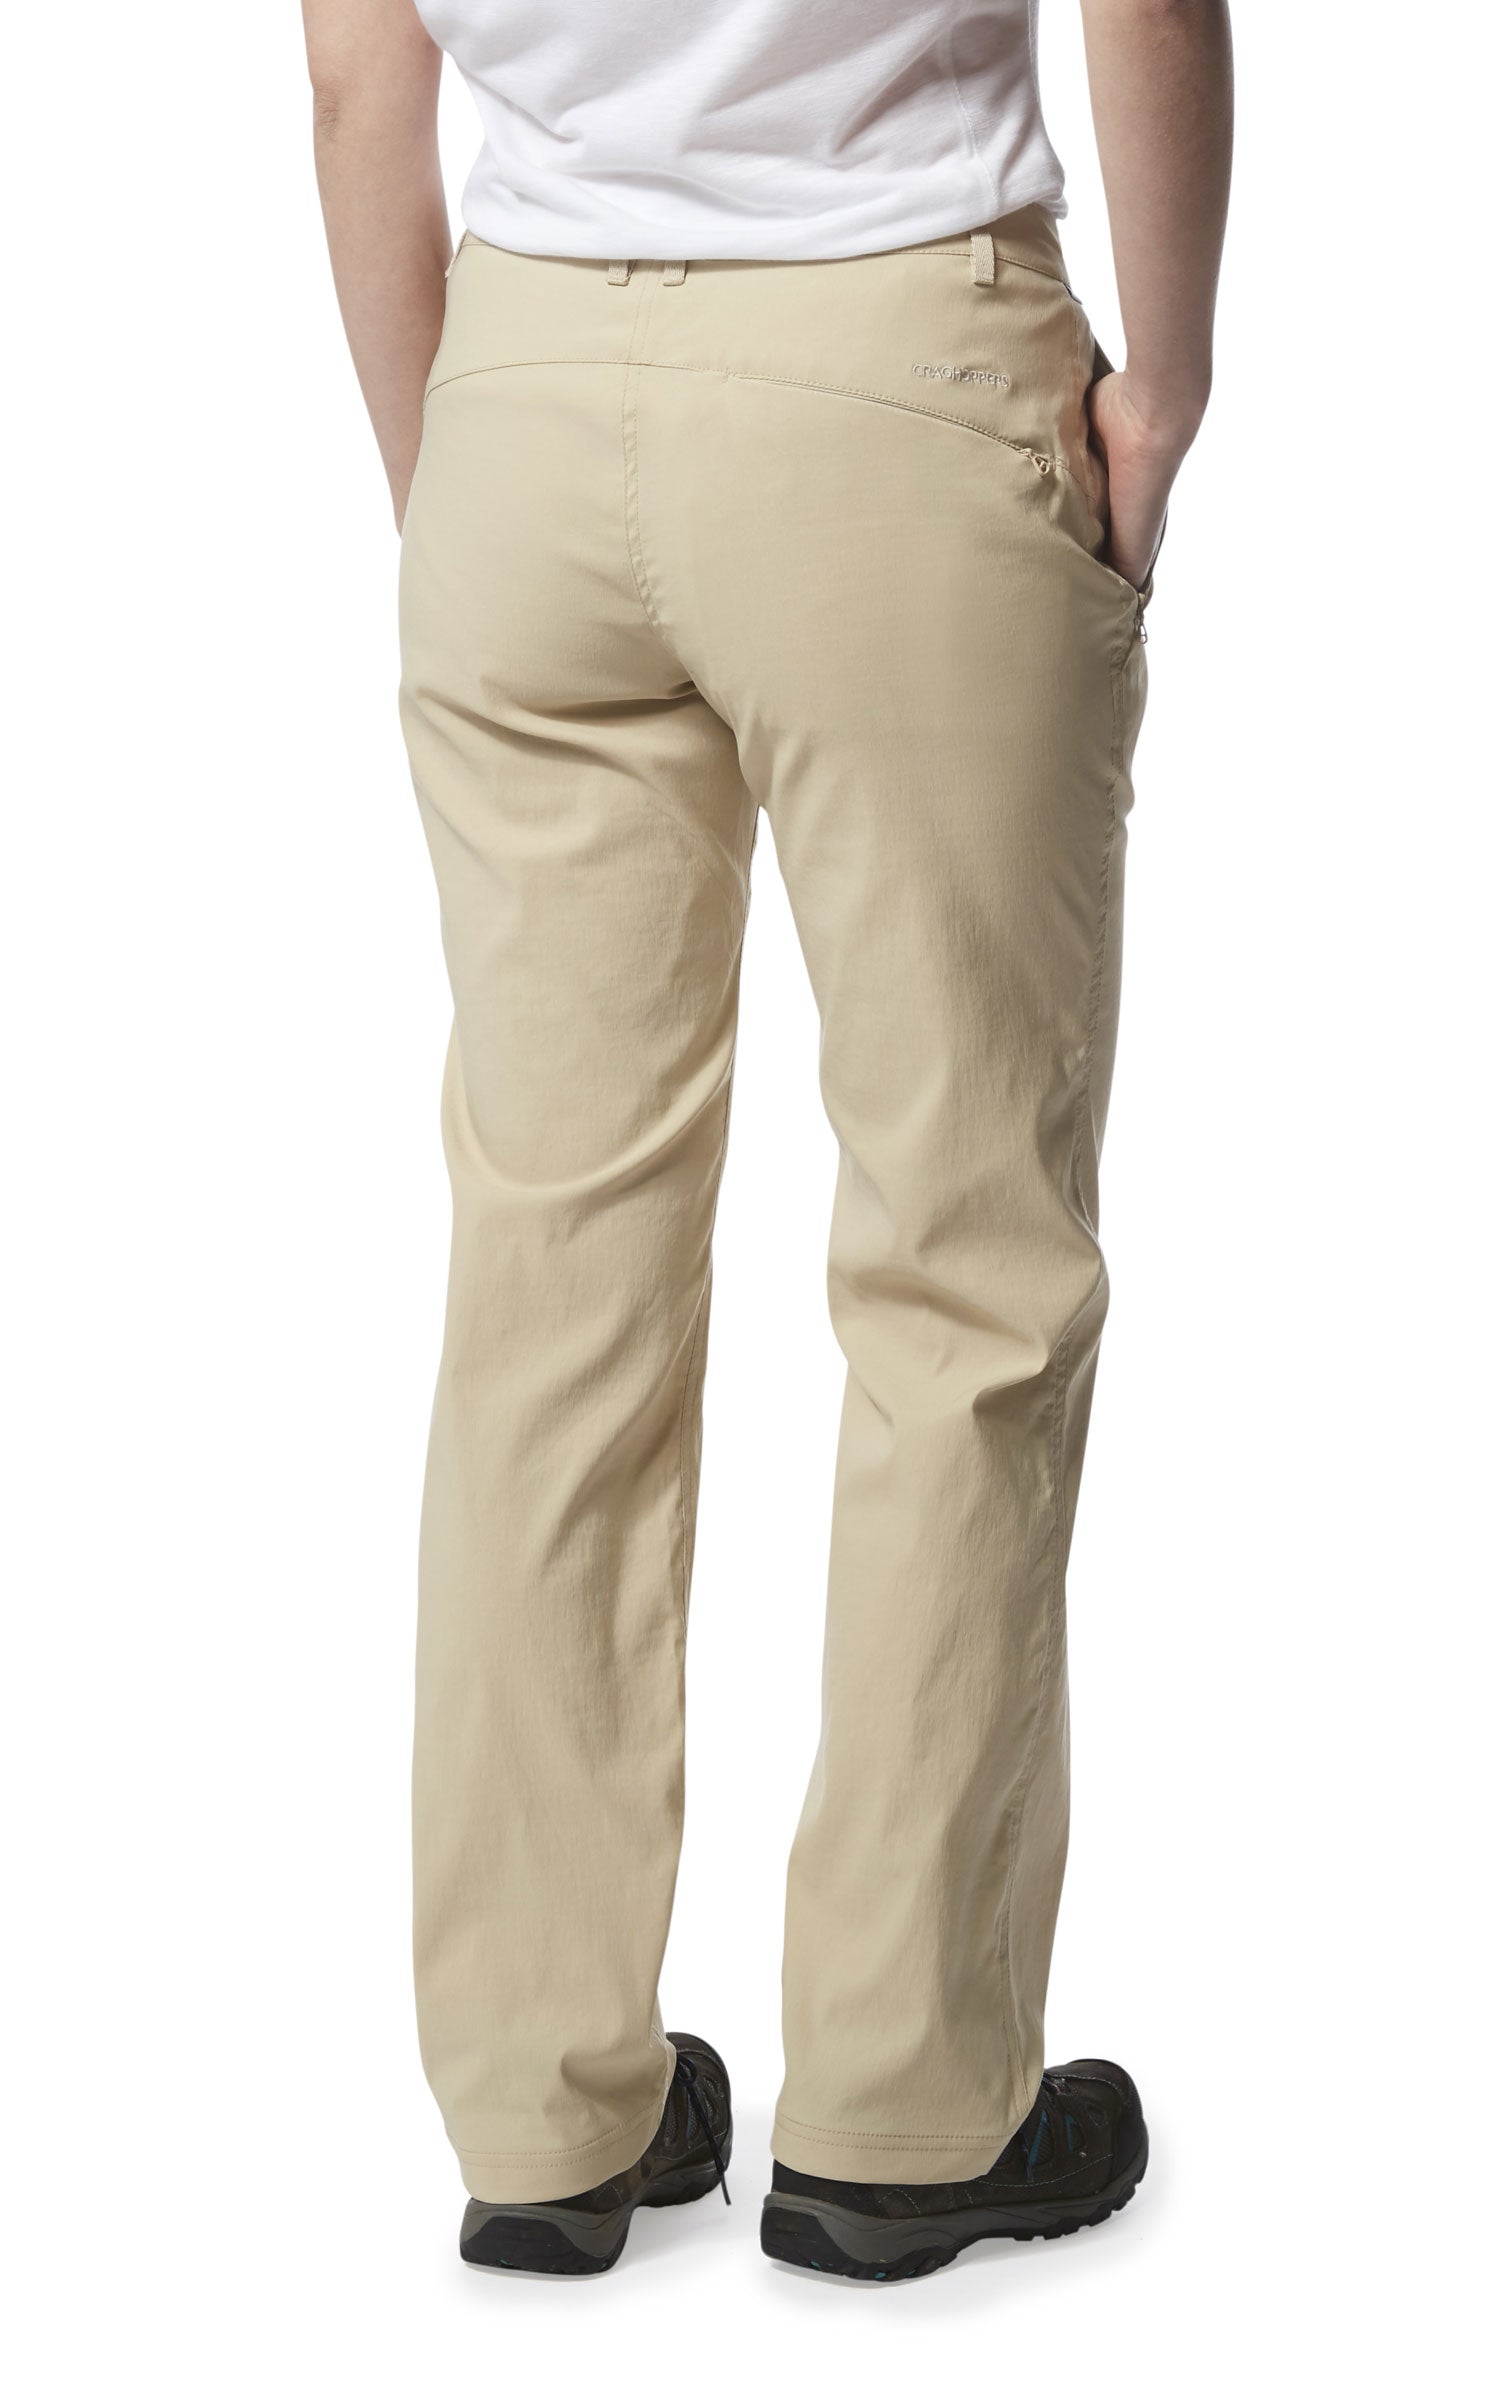 Craghoppers Ladies Kiwi Pro Trousers in Desert Sand